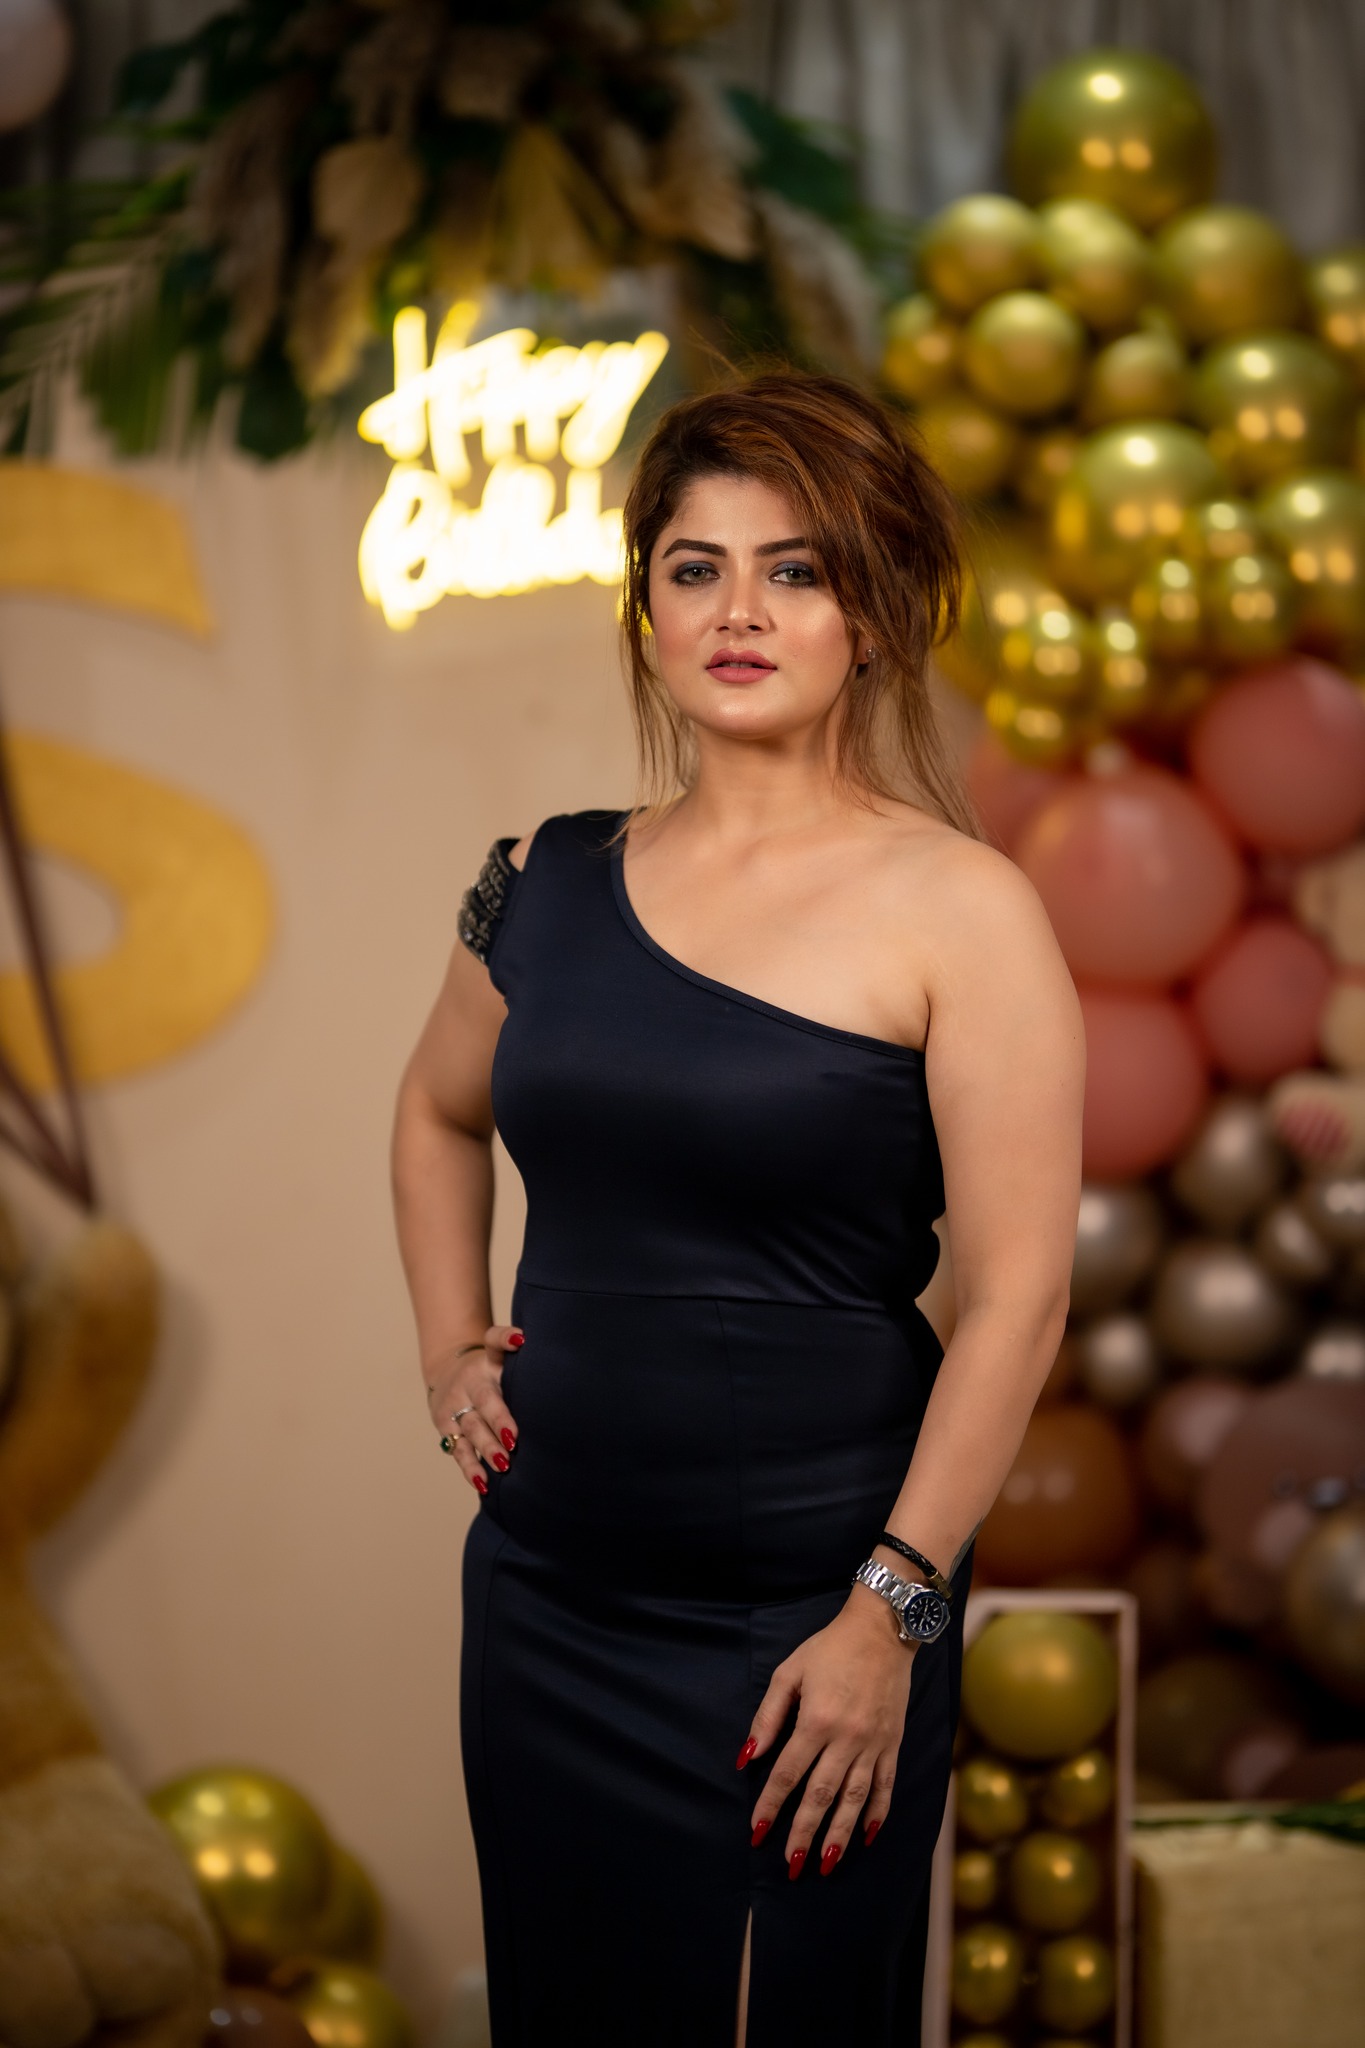 Srabanti Chatterjee shares her stunning party looks; check out the photos